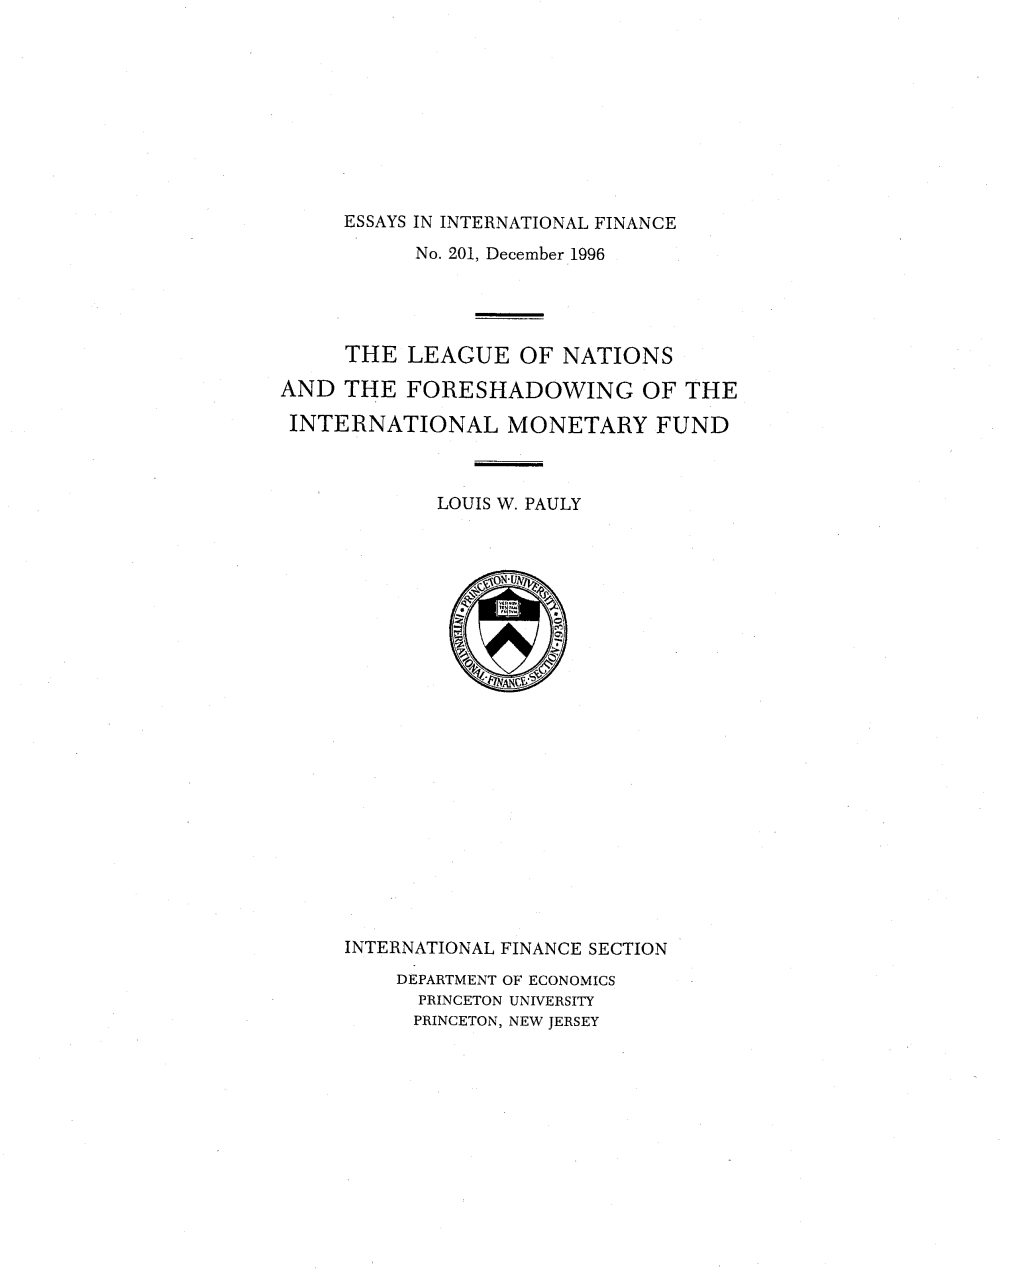 The League of Nations and the Foreshadowing of the International Monetary Fund / Louis Pauly